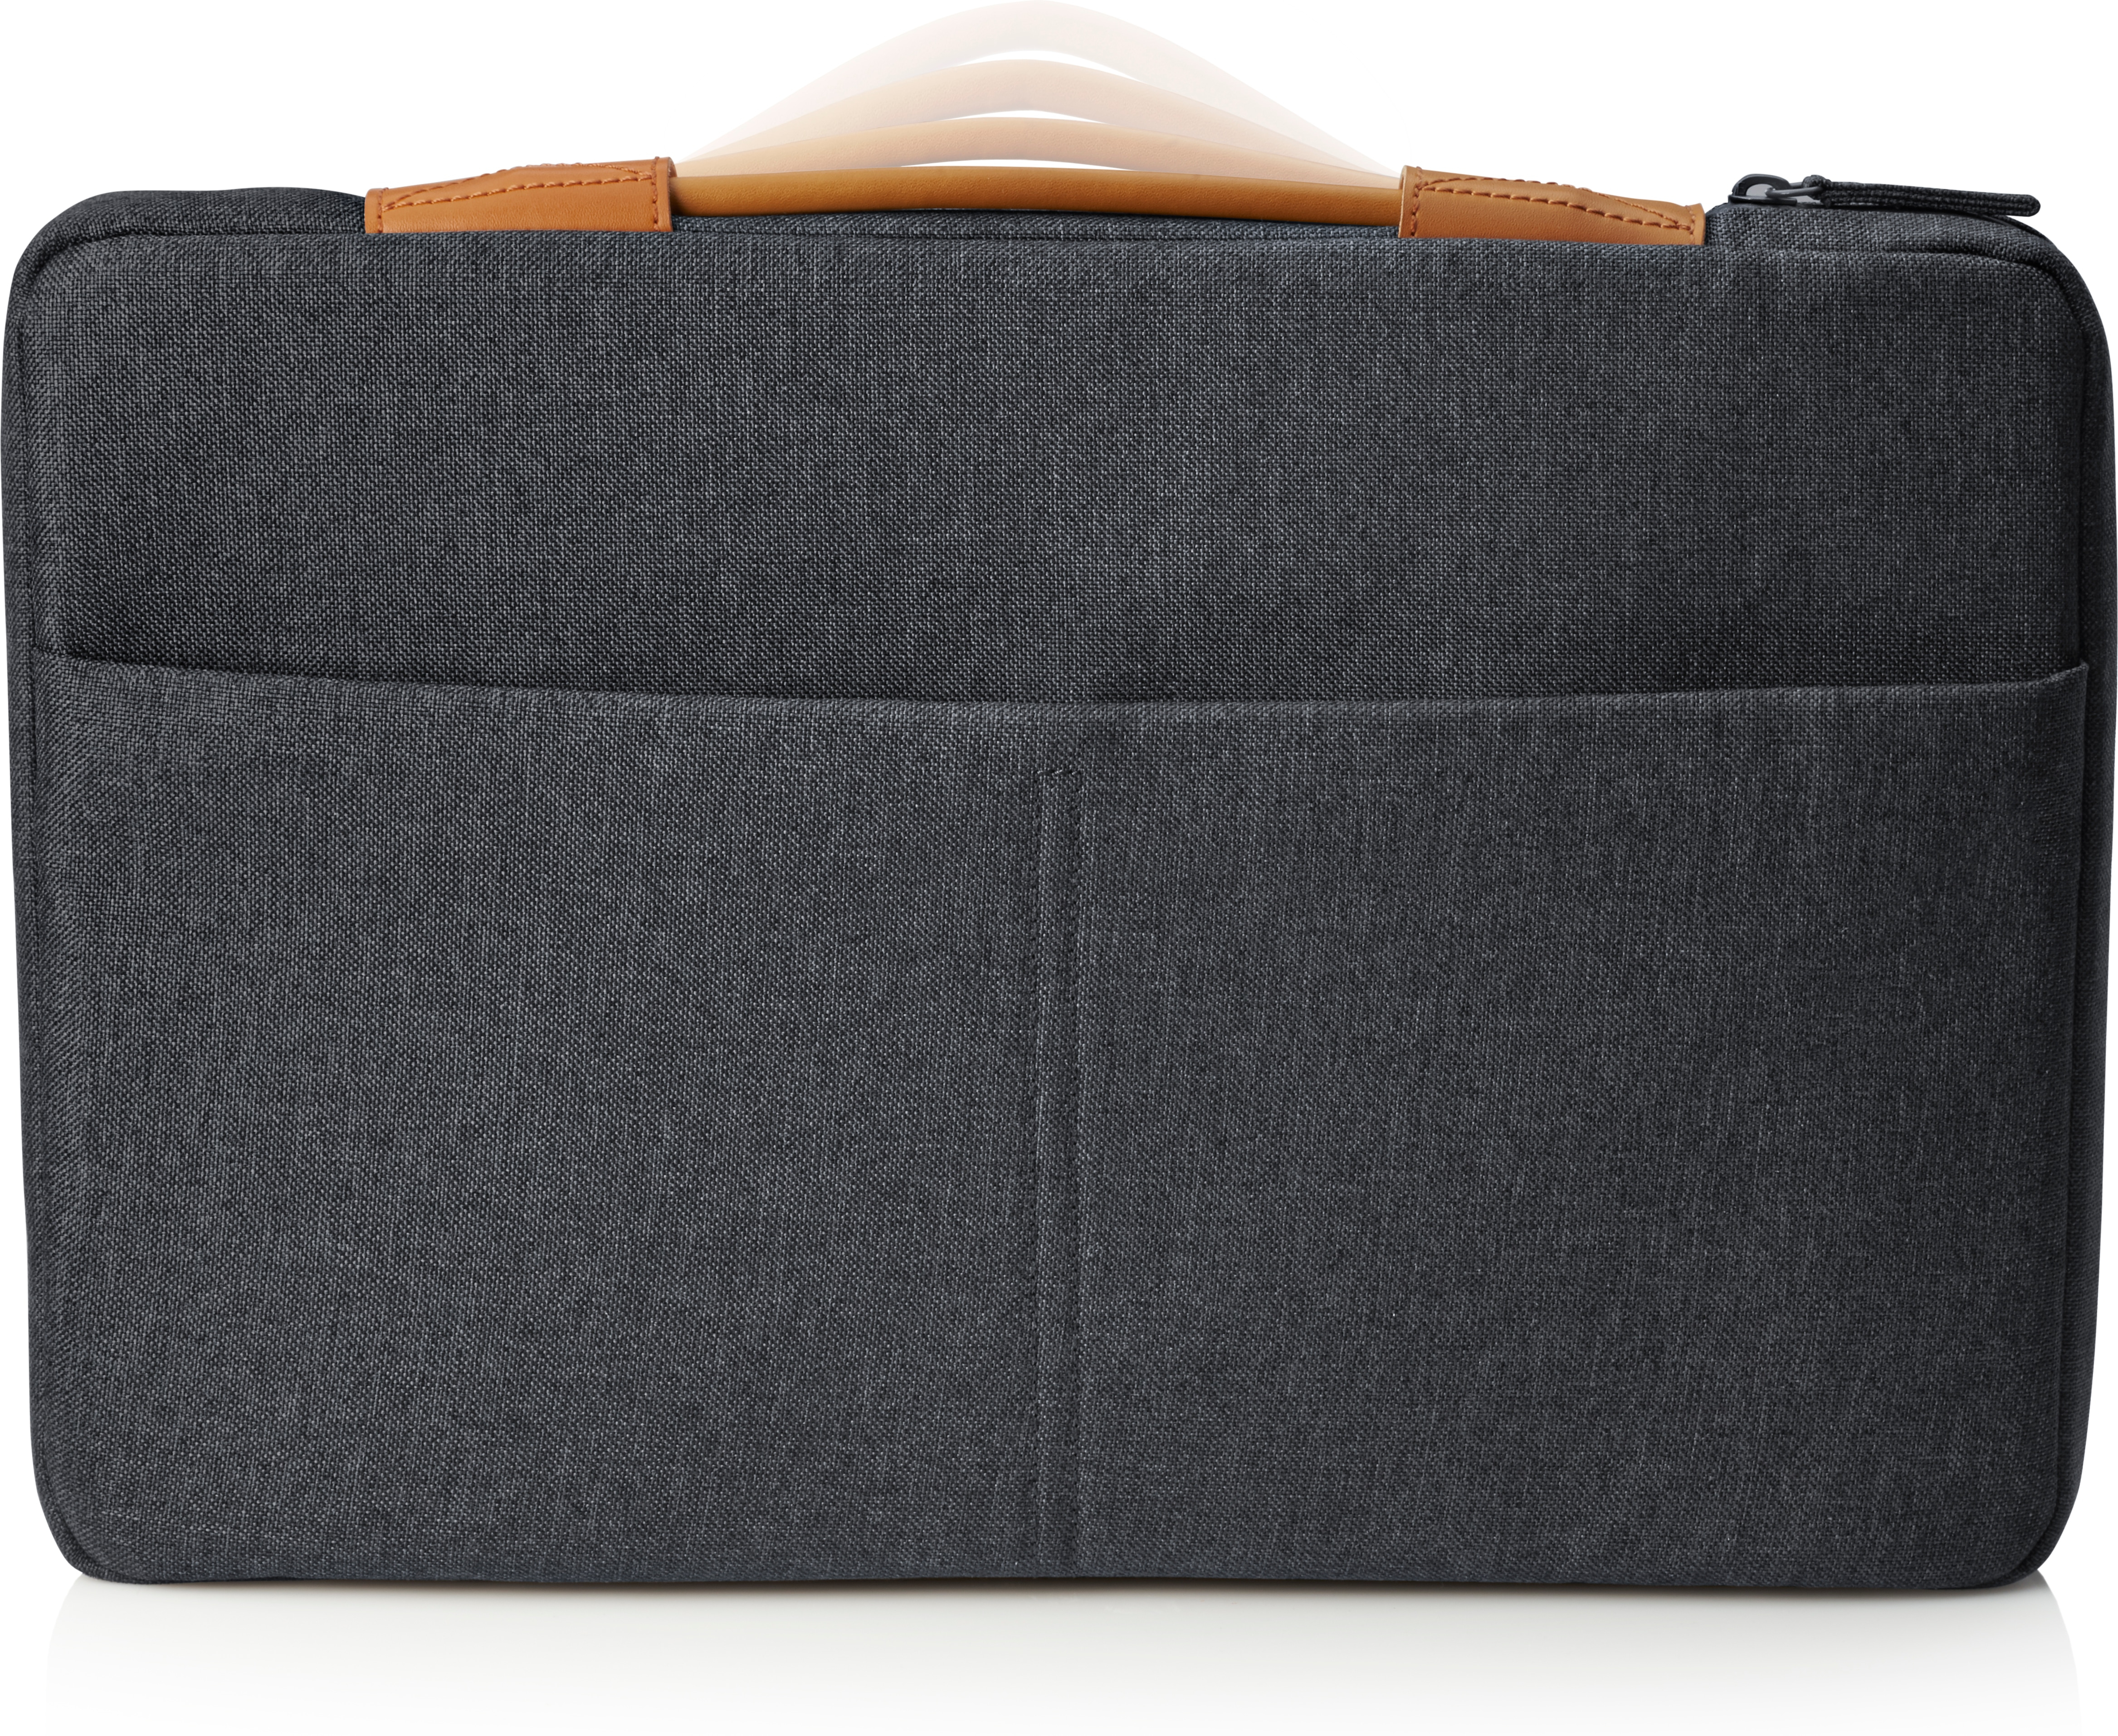 HP Envy Sleeve Urban Fits Laptop up to 14-Inch